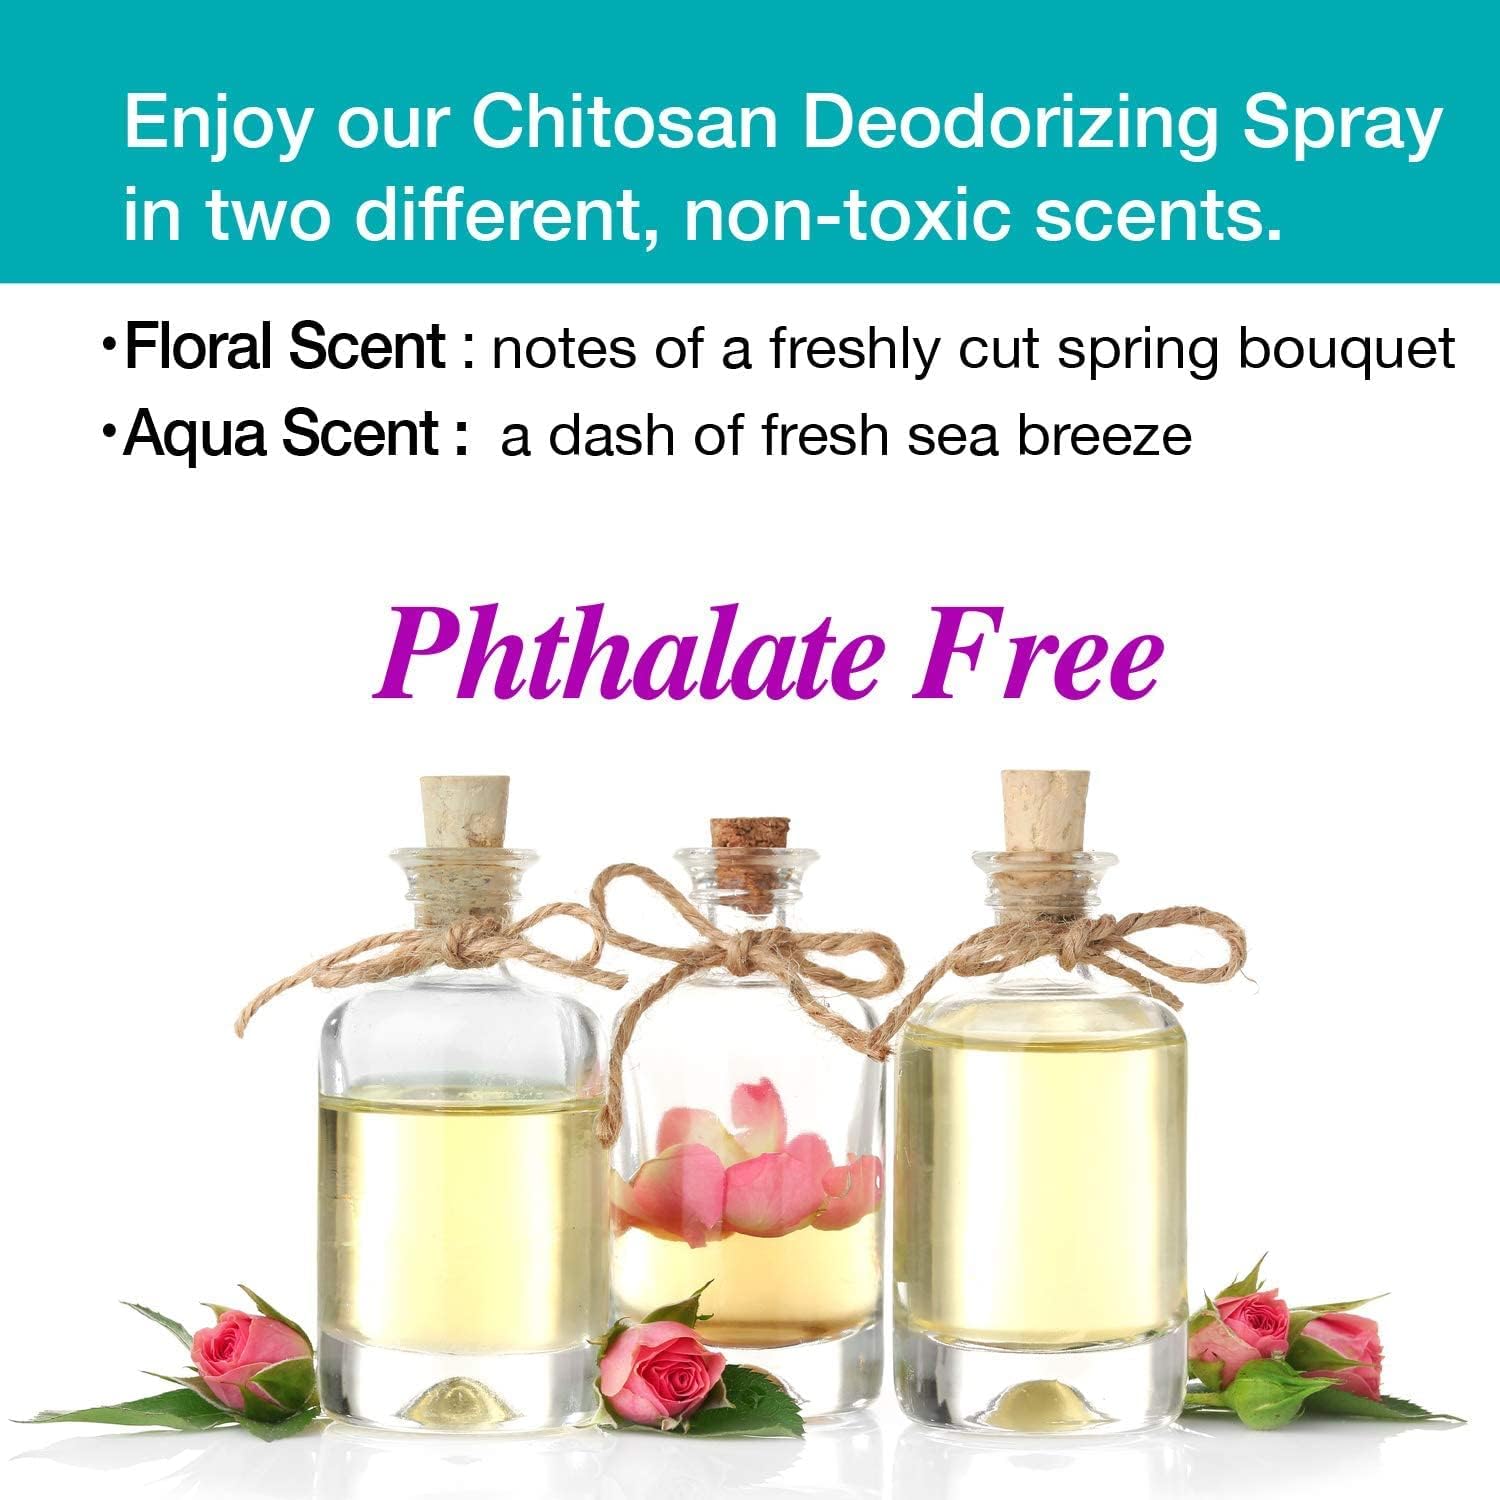 HYPONIC Chitosan Deodorizer - Garden Picnic scent